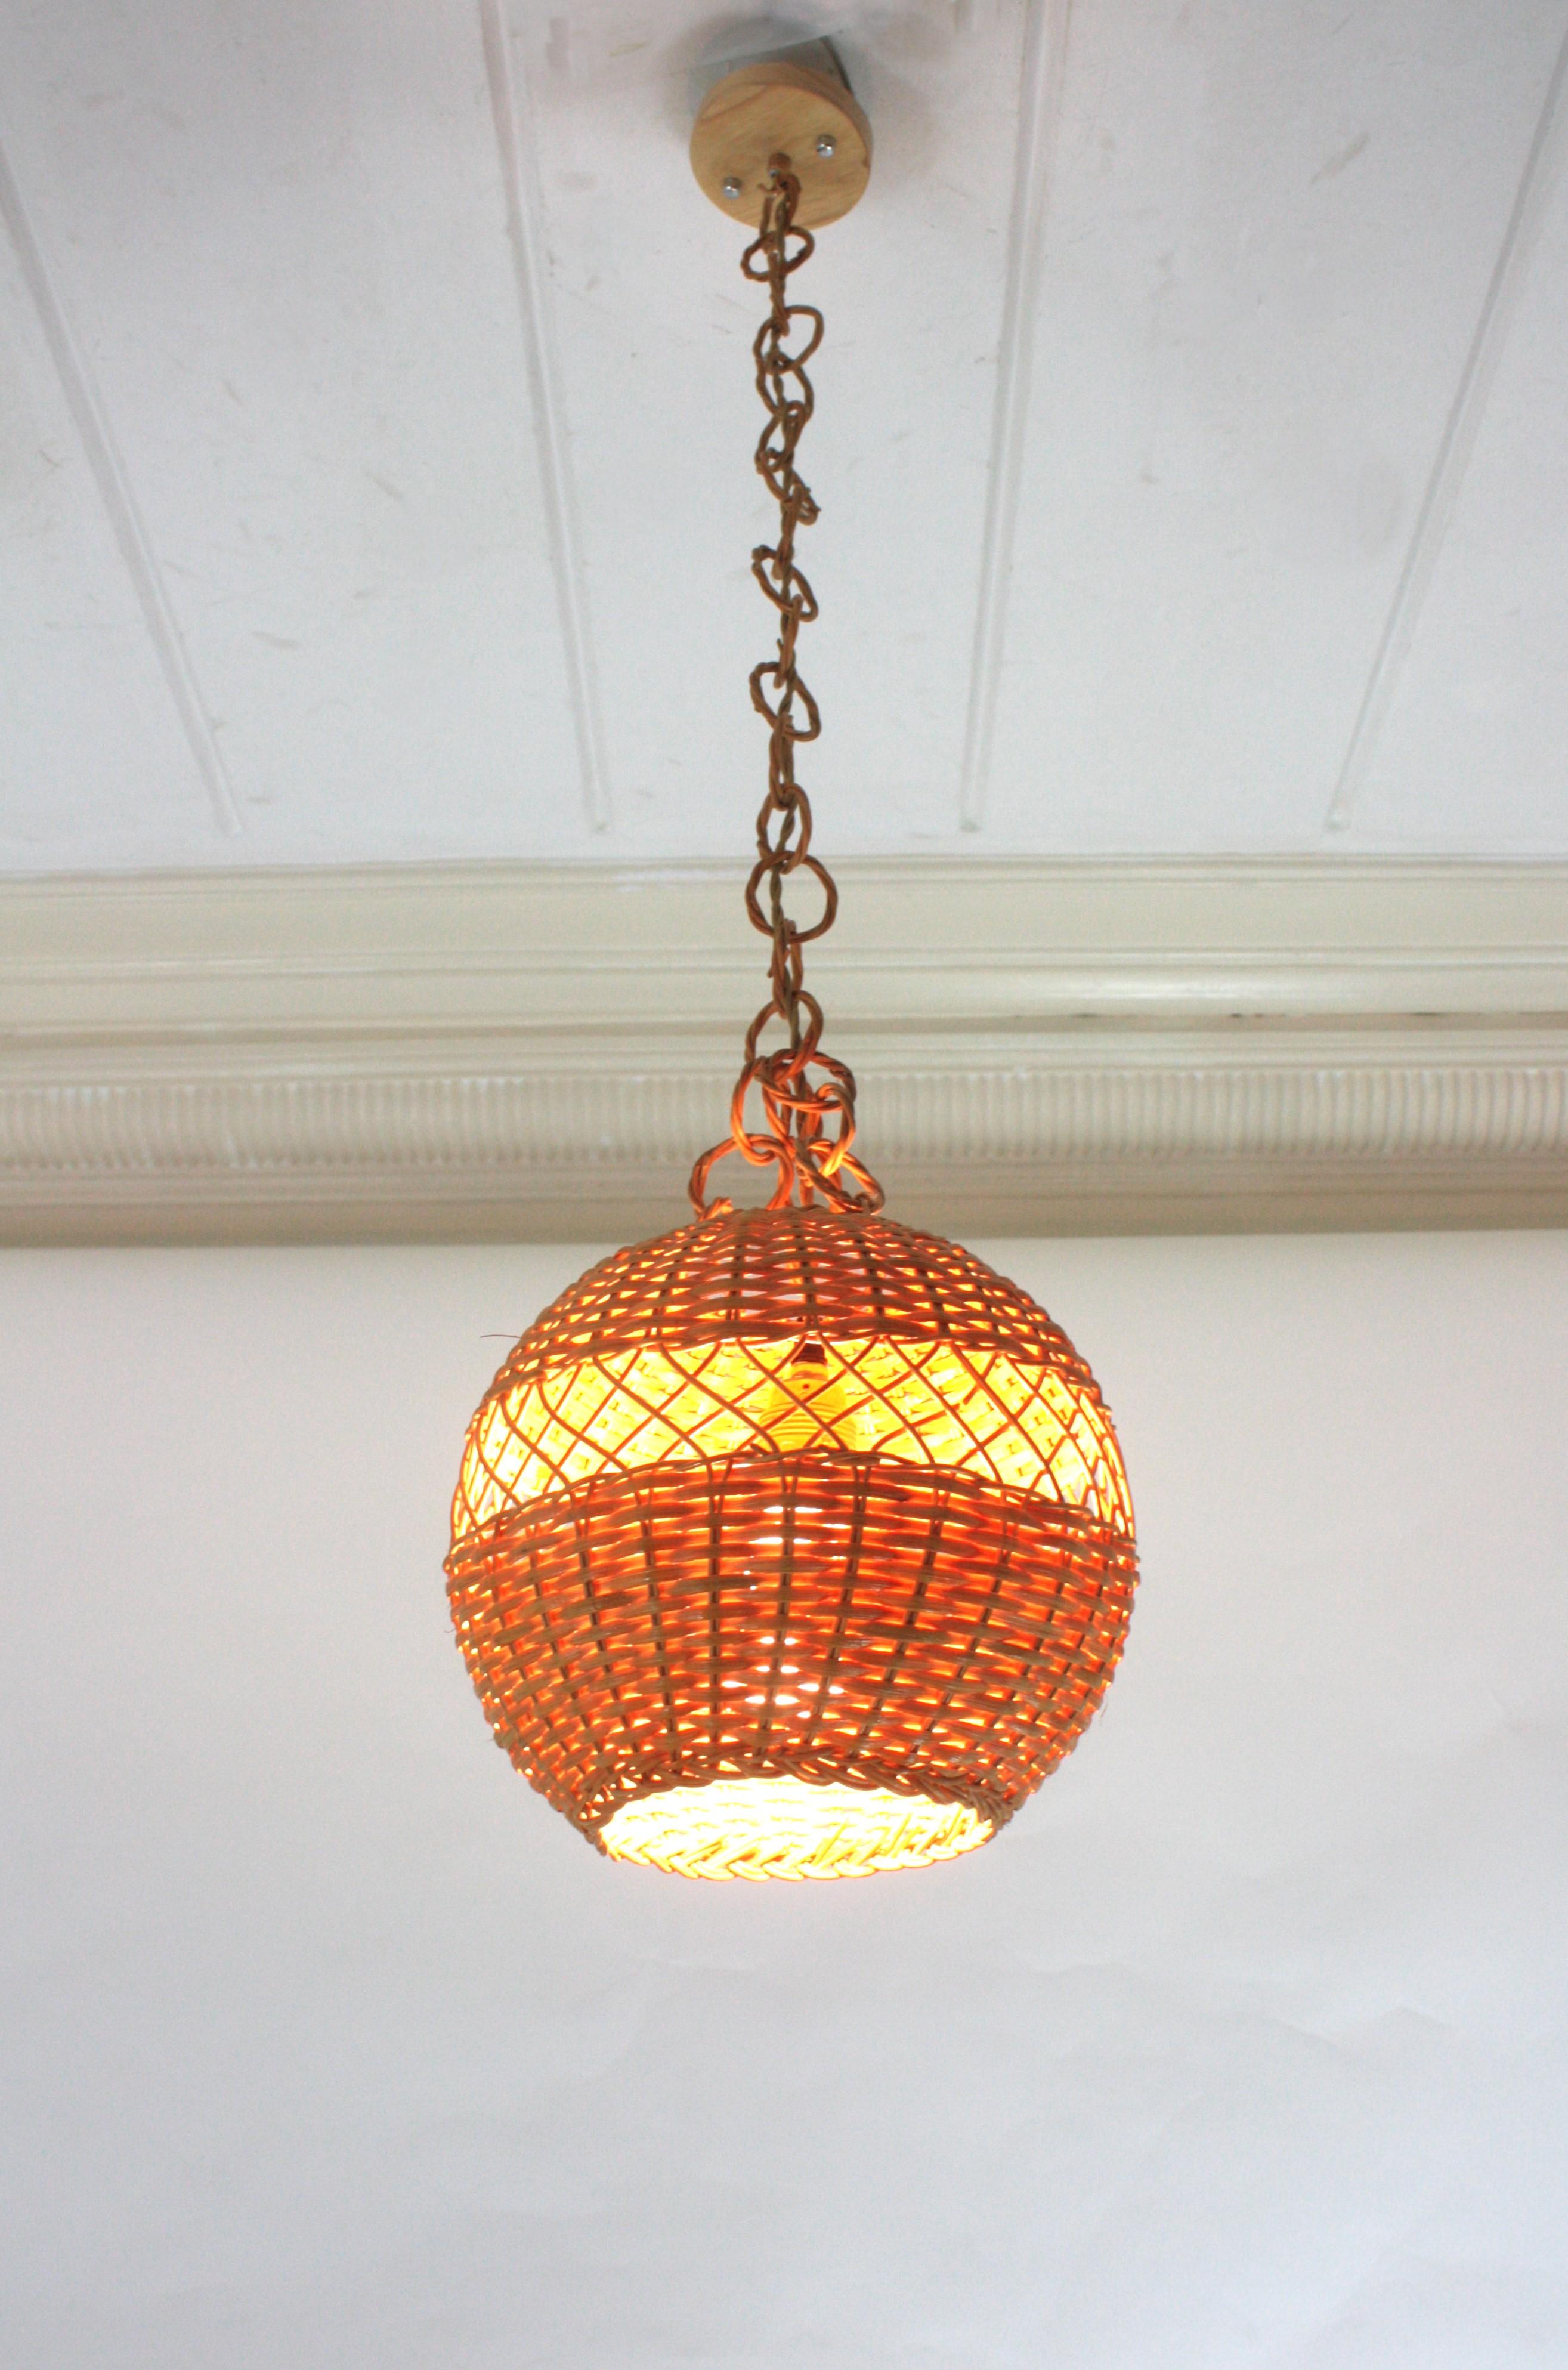 Pair of Handwoven Wicker Globe Pendant Lights or Lanterns For Sale 6